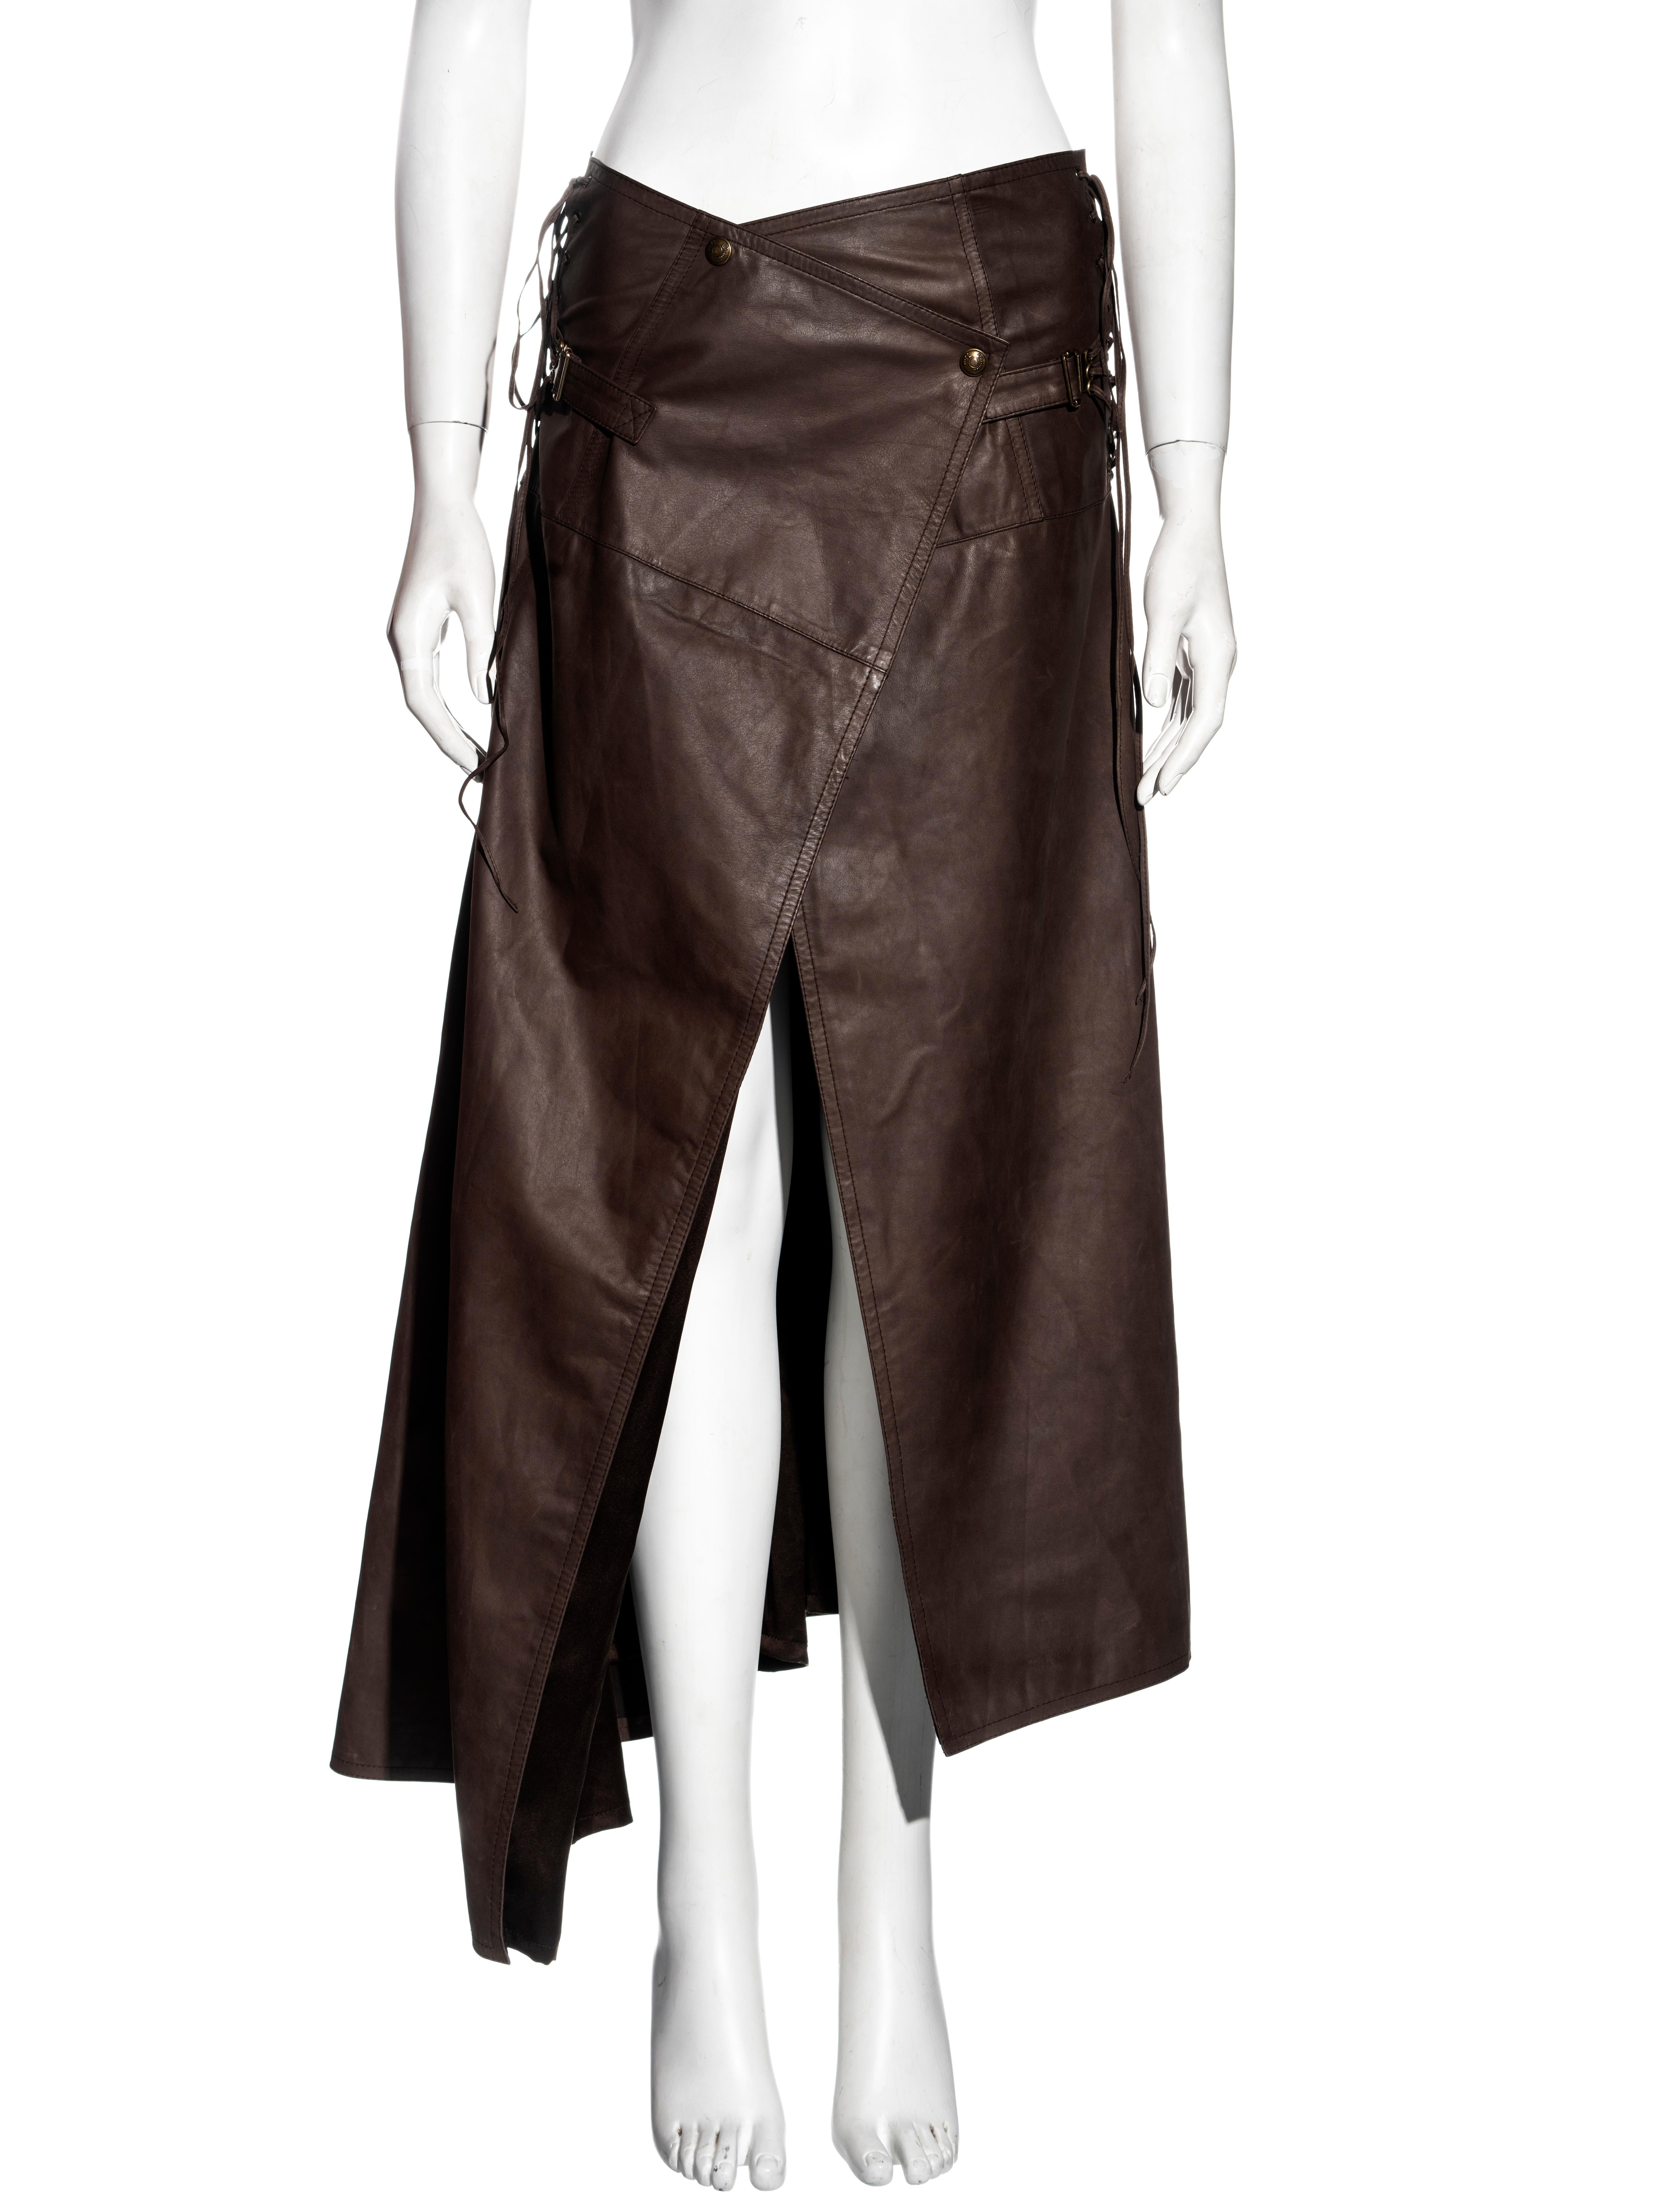 ▪ Christian Dior brown leather skirt  
▪ Designed by John Galliano 
▪ Asymmetric cut  
▪ Front leg slit  
▪ Lace-up fastenings at side seams
▪ Brass hardware
▪ Press stud fasteners 
▪ Silk lining  
▪ Size XS 
▪ Spring-Summer 2001 
▪ 100% Leather 
▪